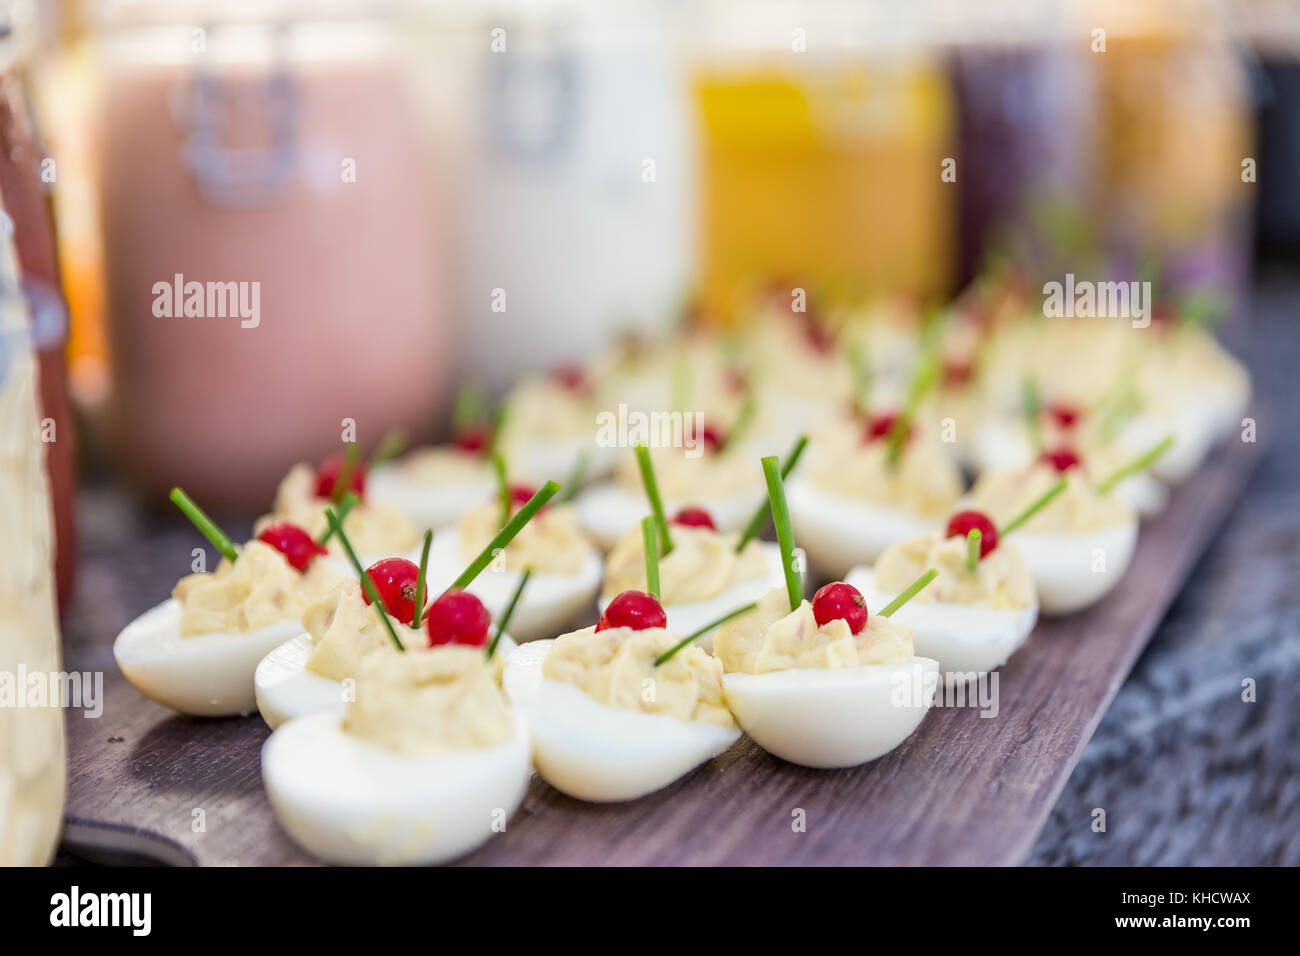 Eggs with mayonnaise inside, jars of sauce in the background Stock Photo